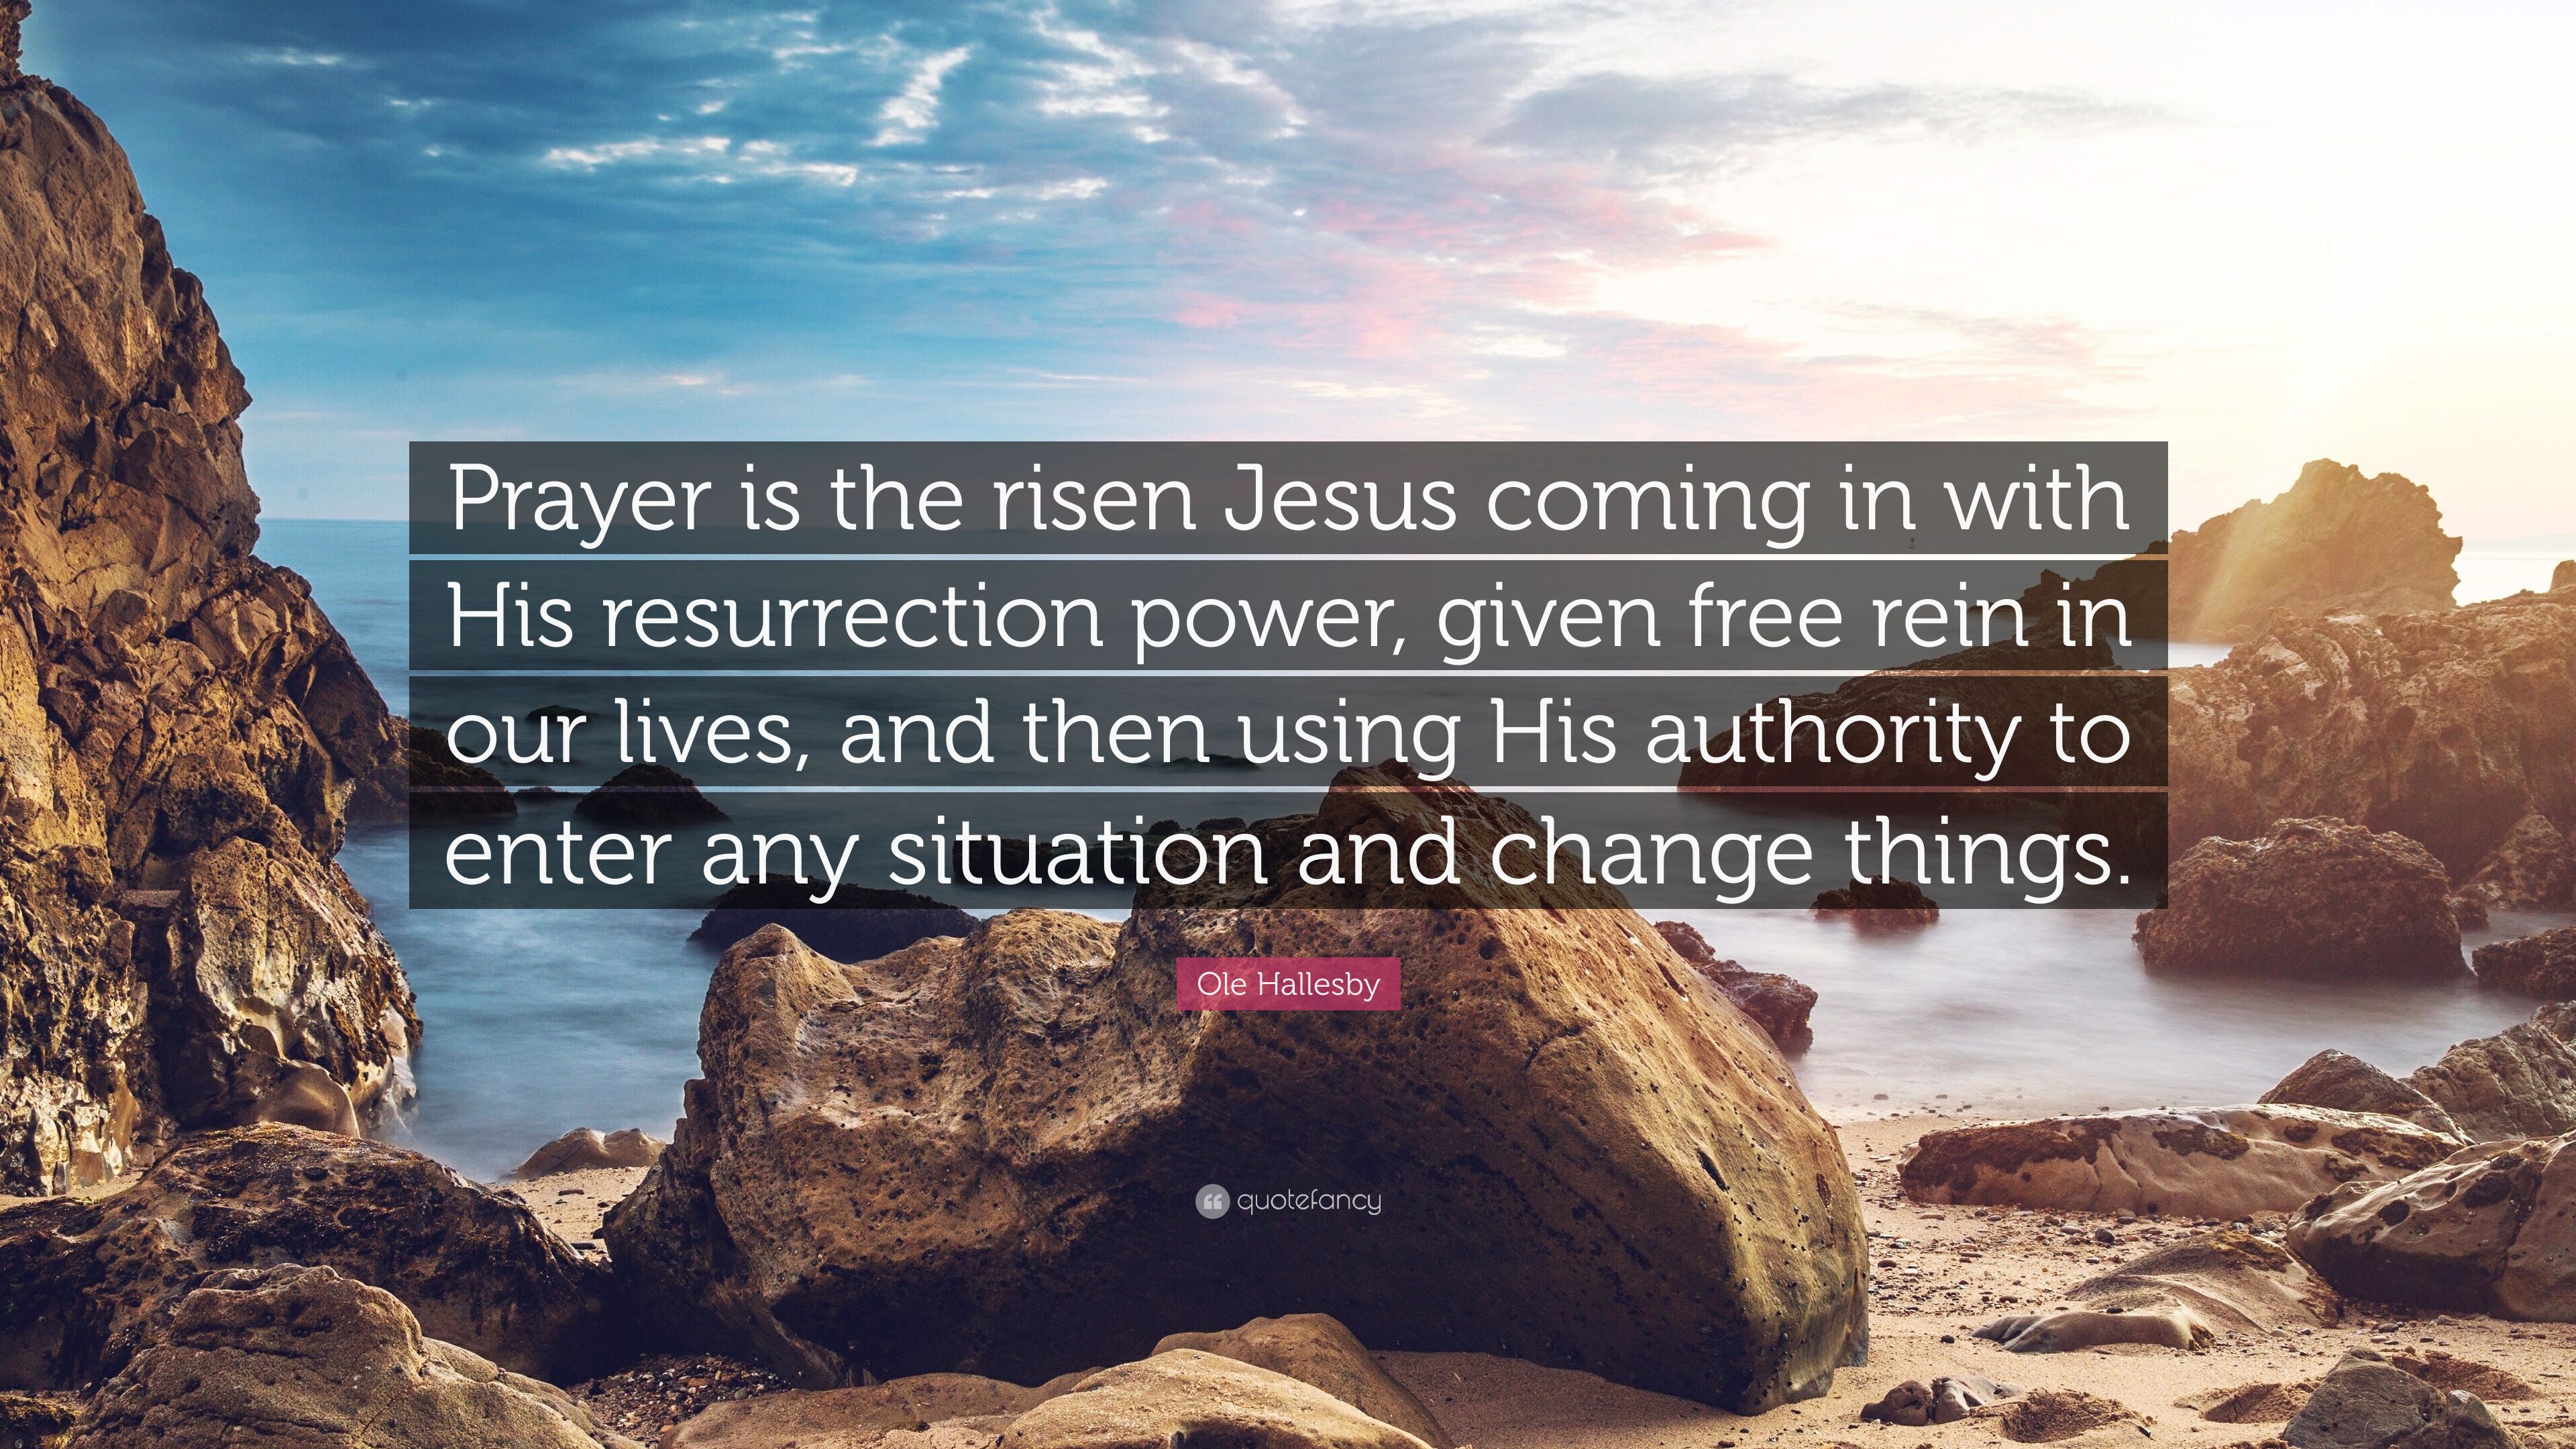 Ole Hallesby Quote: “Prayer is the risen Jesus coming in with His